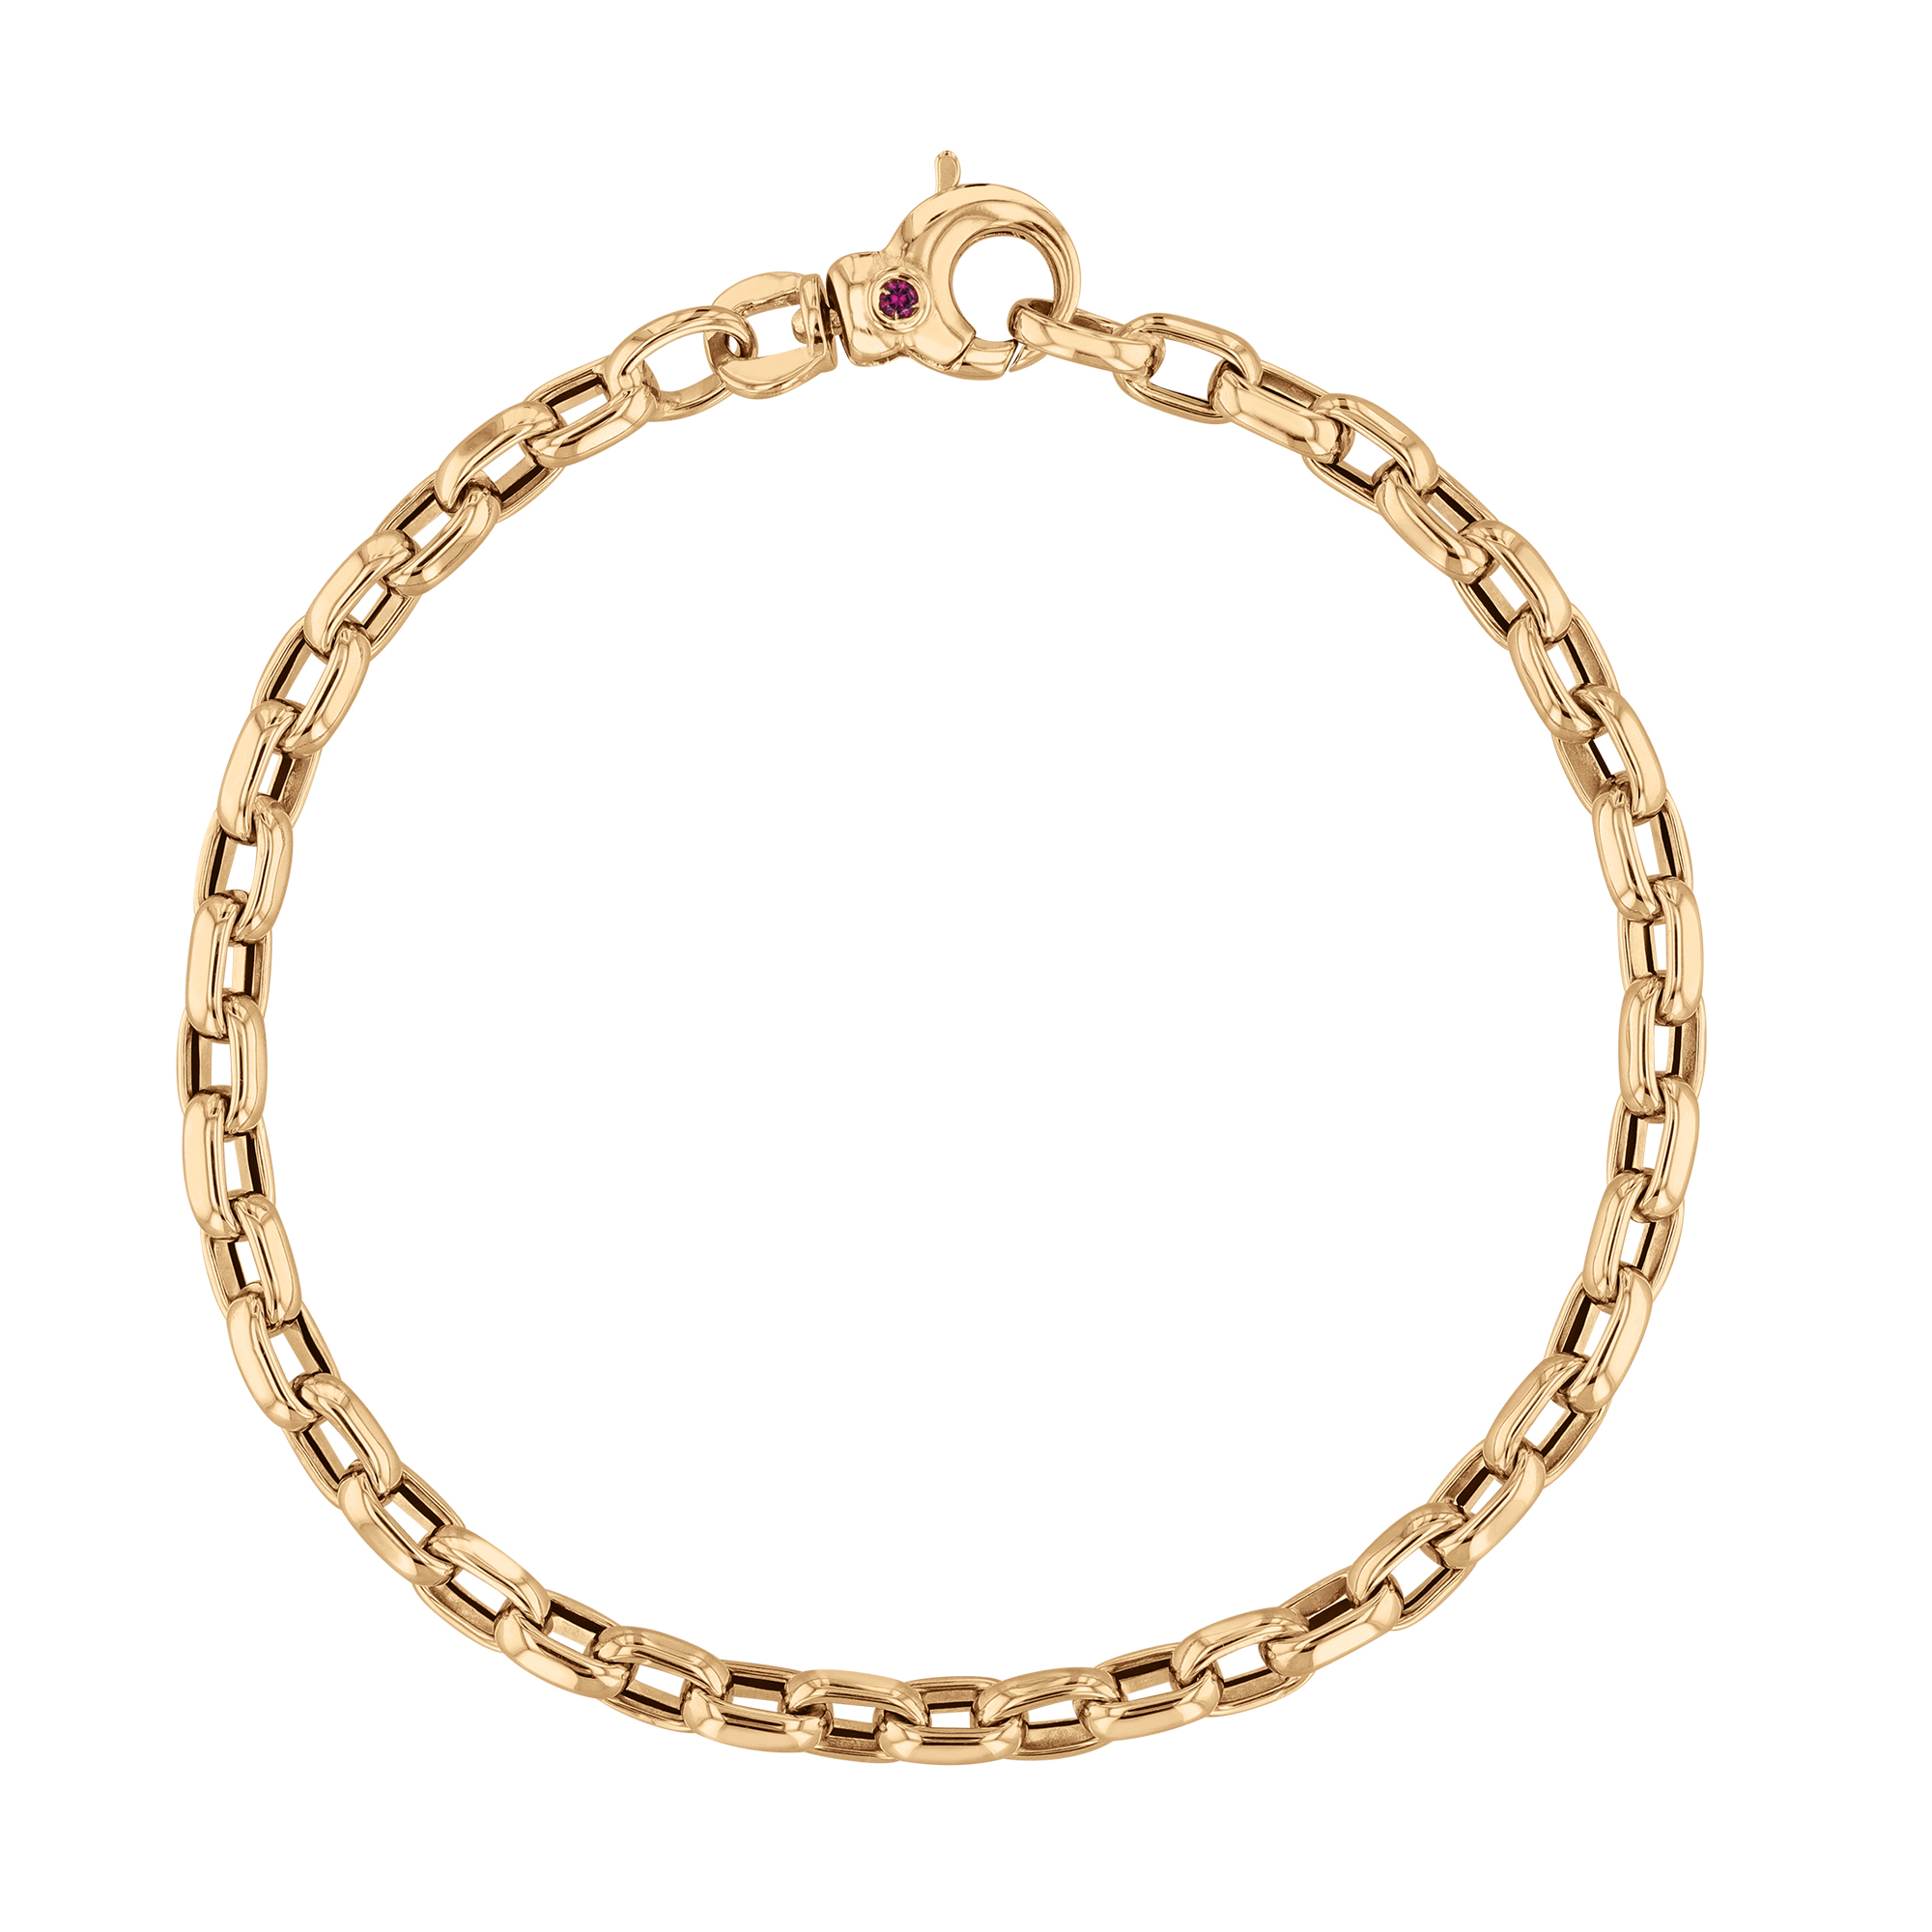 Roberto Coin Designer Yellow Gold Square Link Bracelet | 7 Inches -  5310136AYLB0